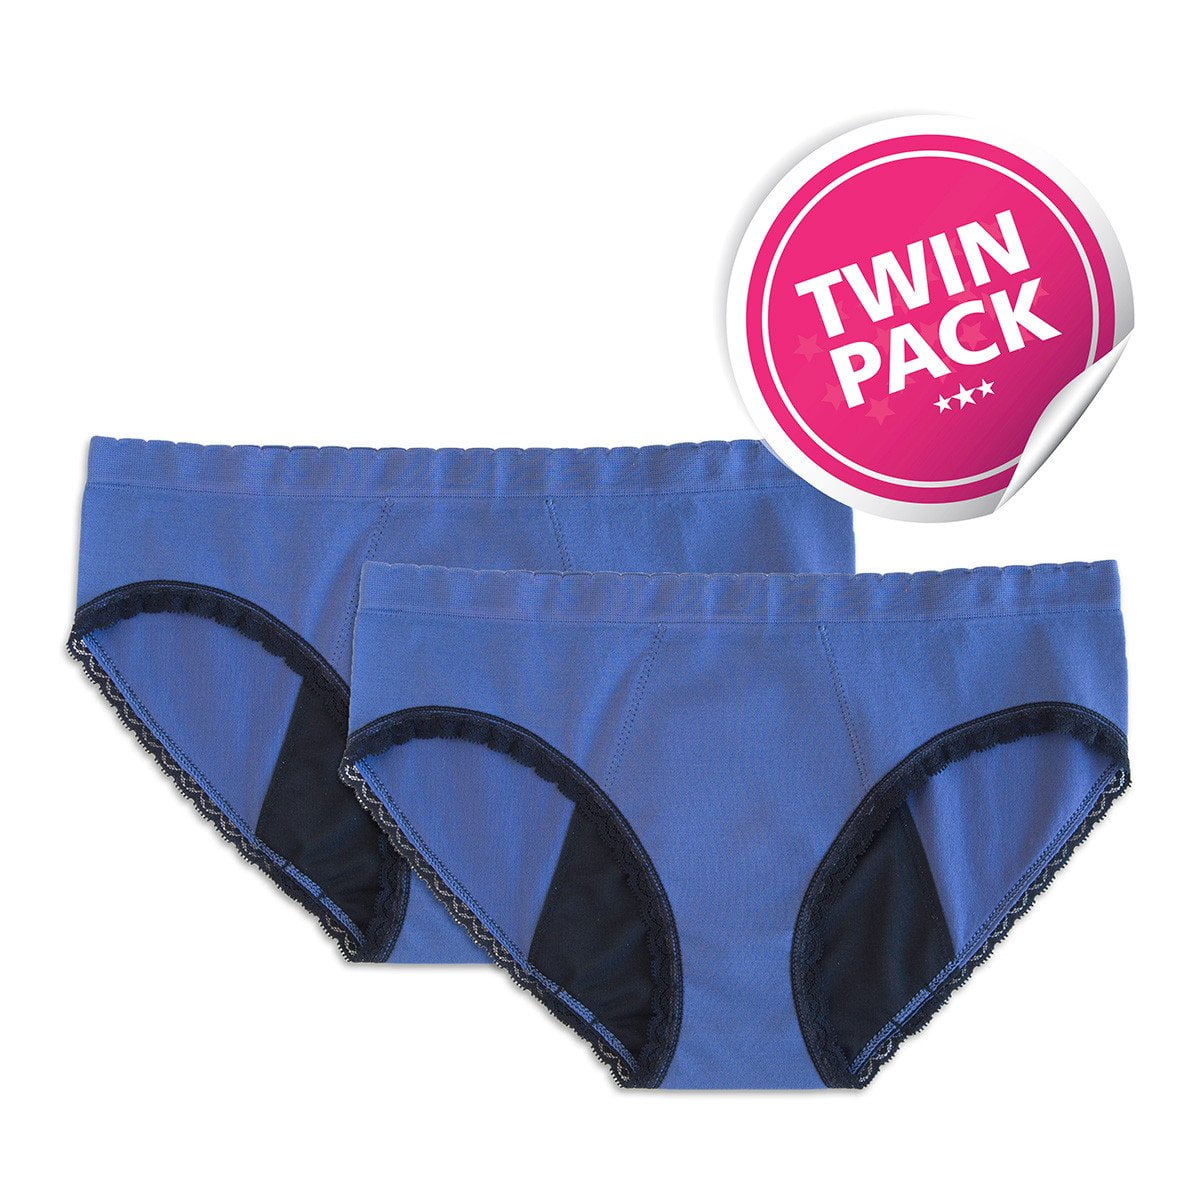 Stain-free Period Panty • 1 Pc • Re-usable & Organic - The Roots